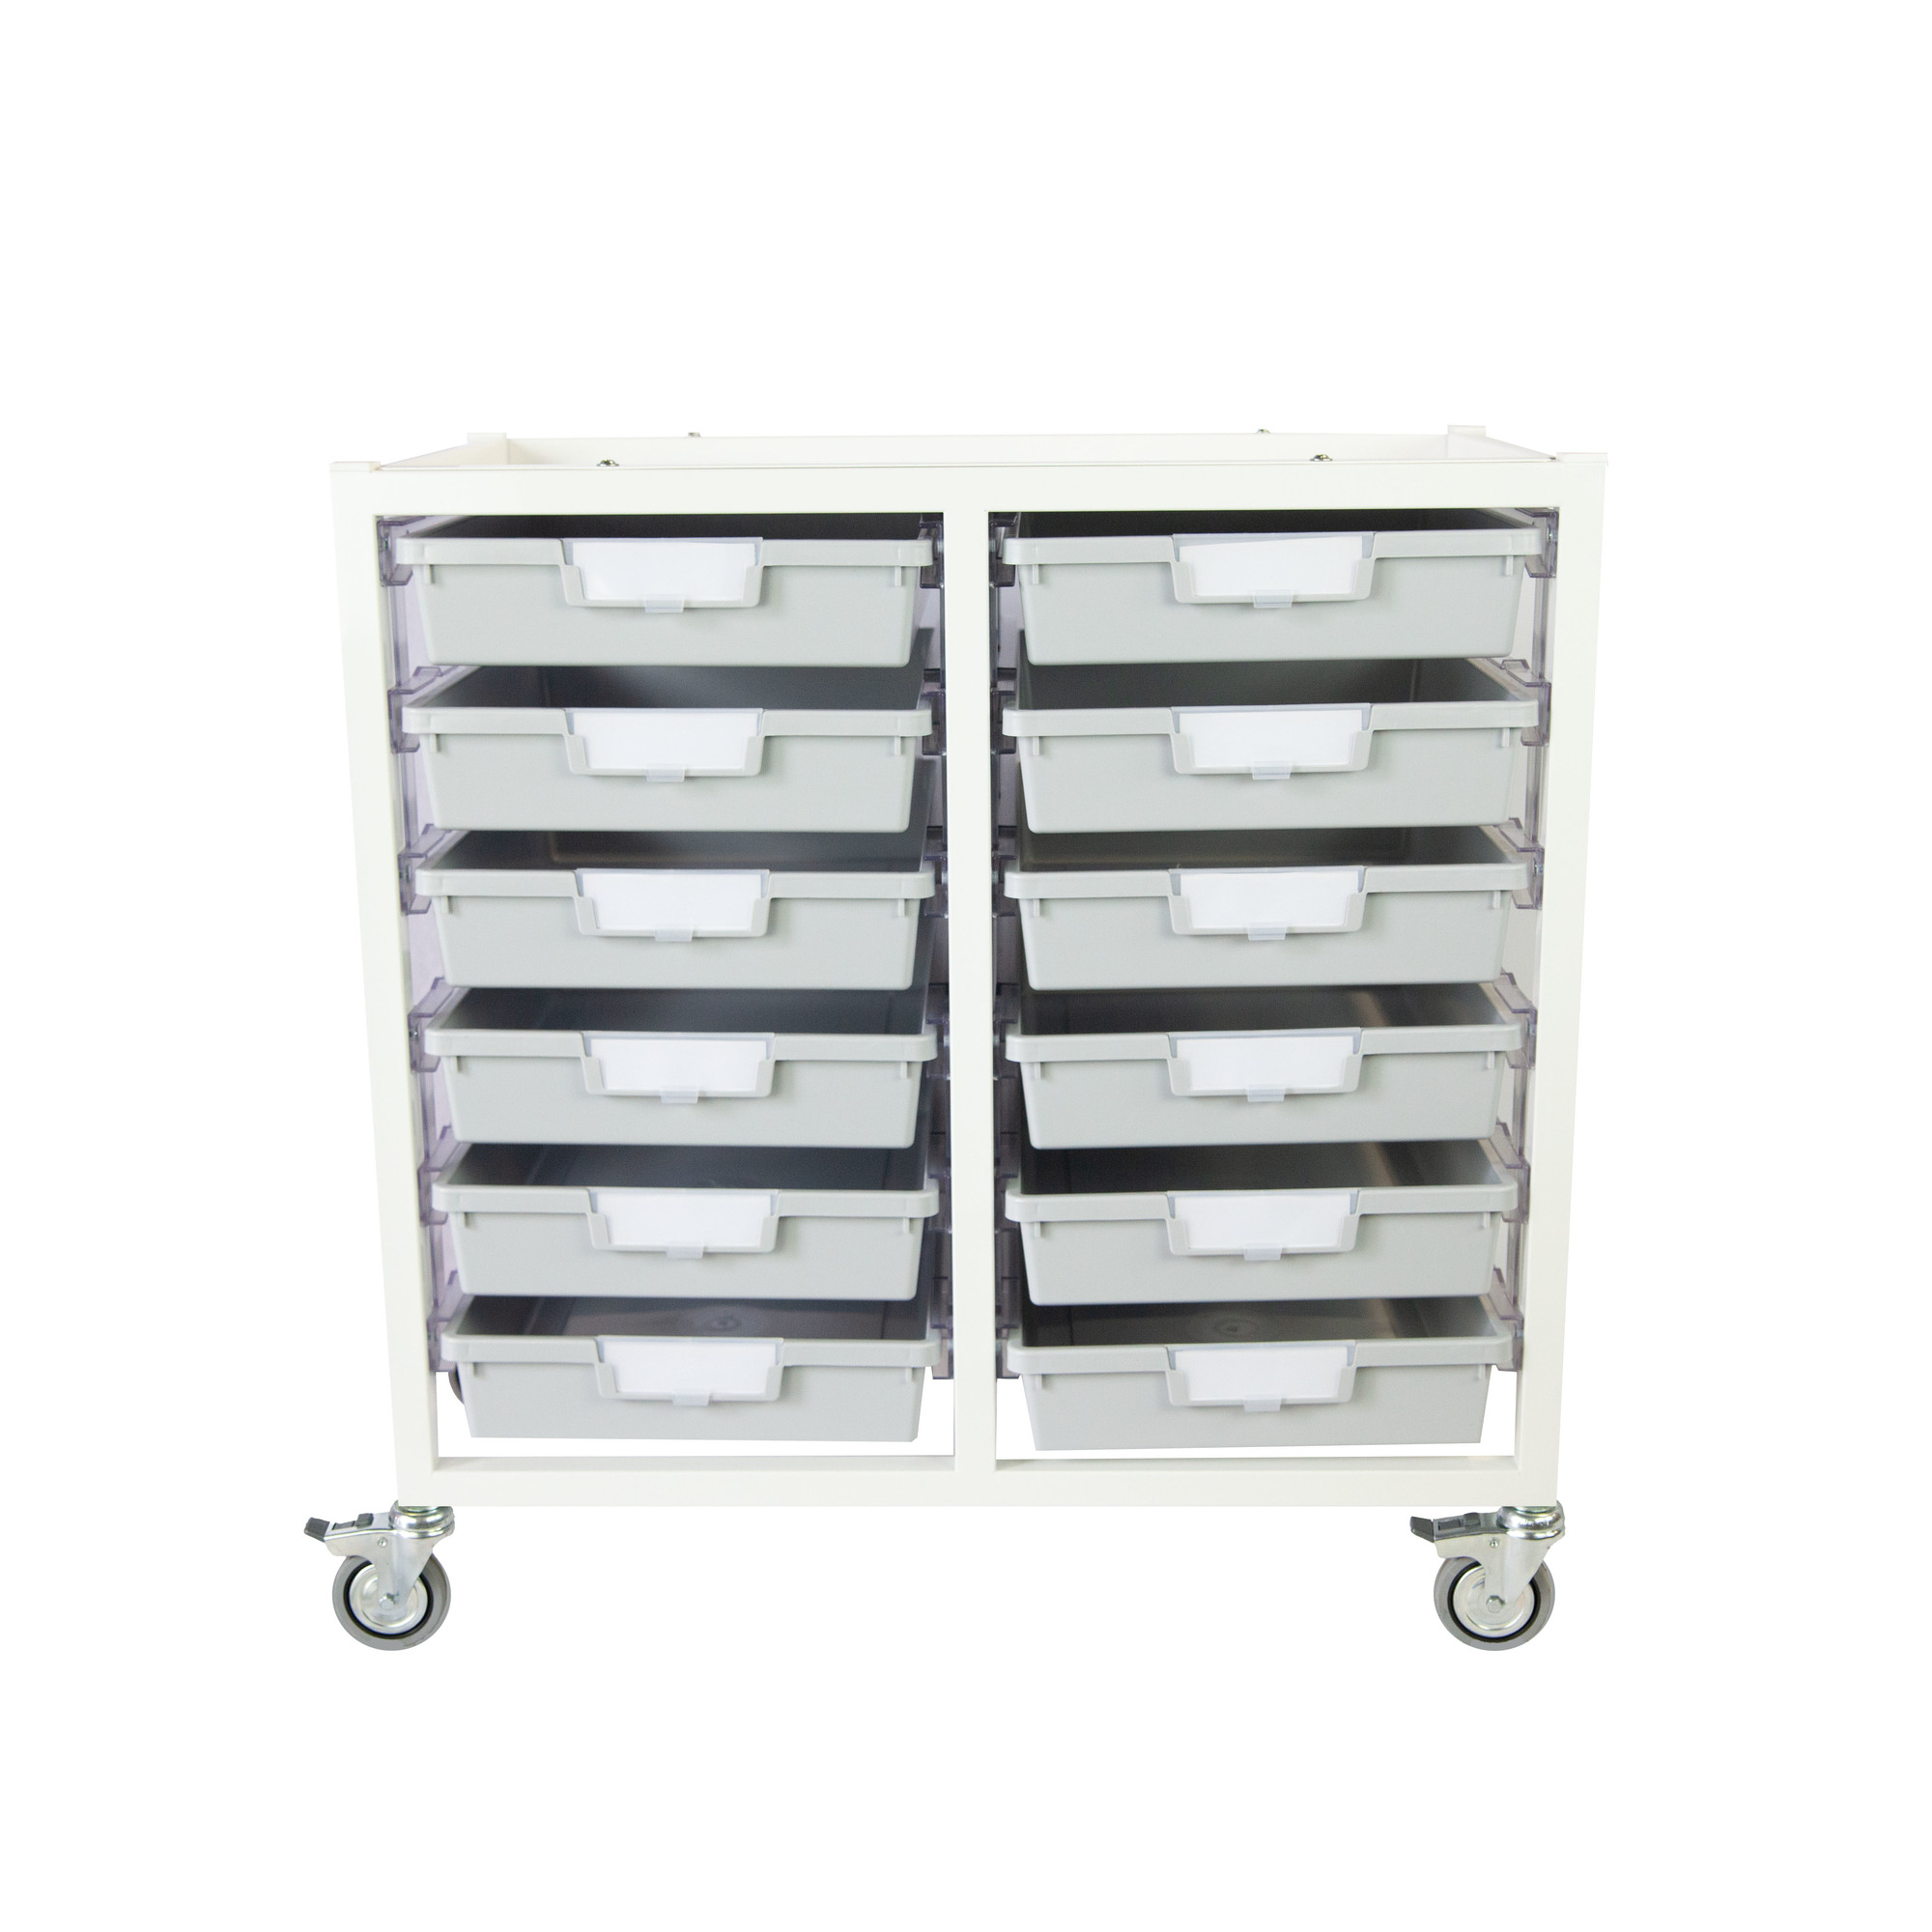 Certwood, Swift Cart Slim-White with 12 Gray Trays, Included (qty.) 1, Material Steel, Height 29.5 in, Model CE2101WH-12SLG